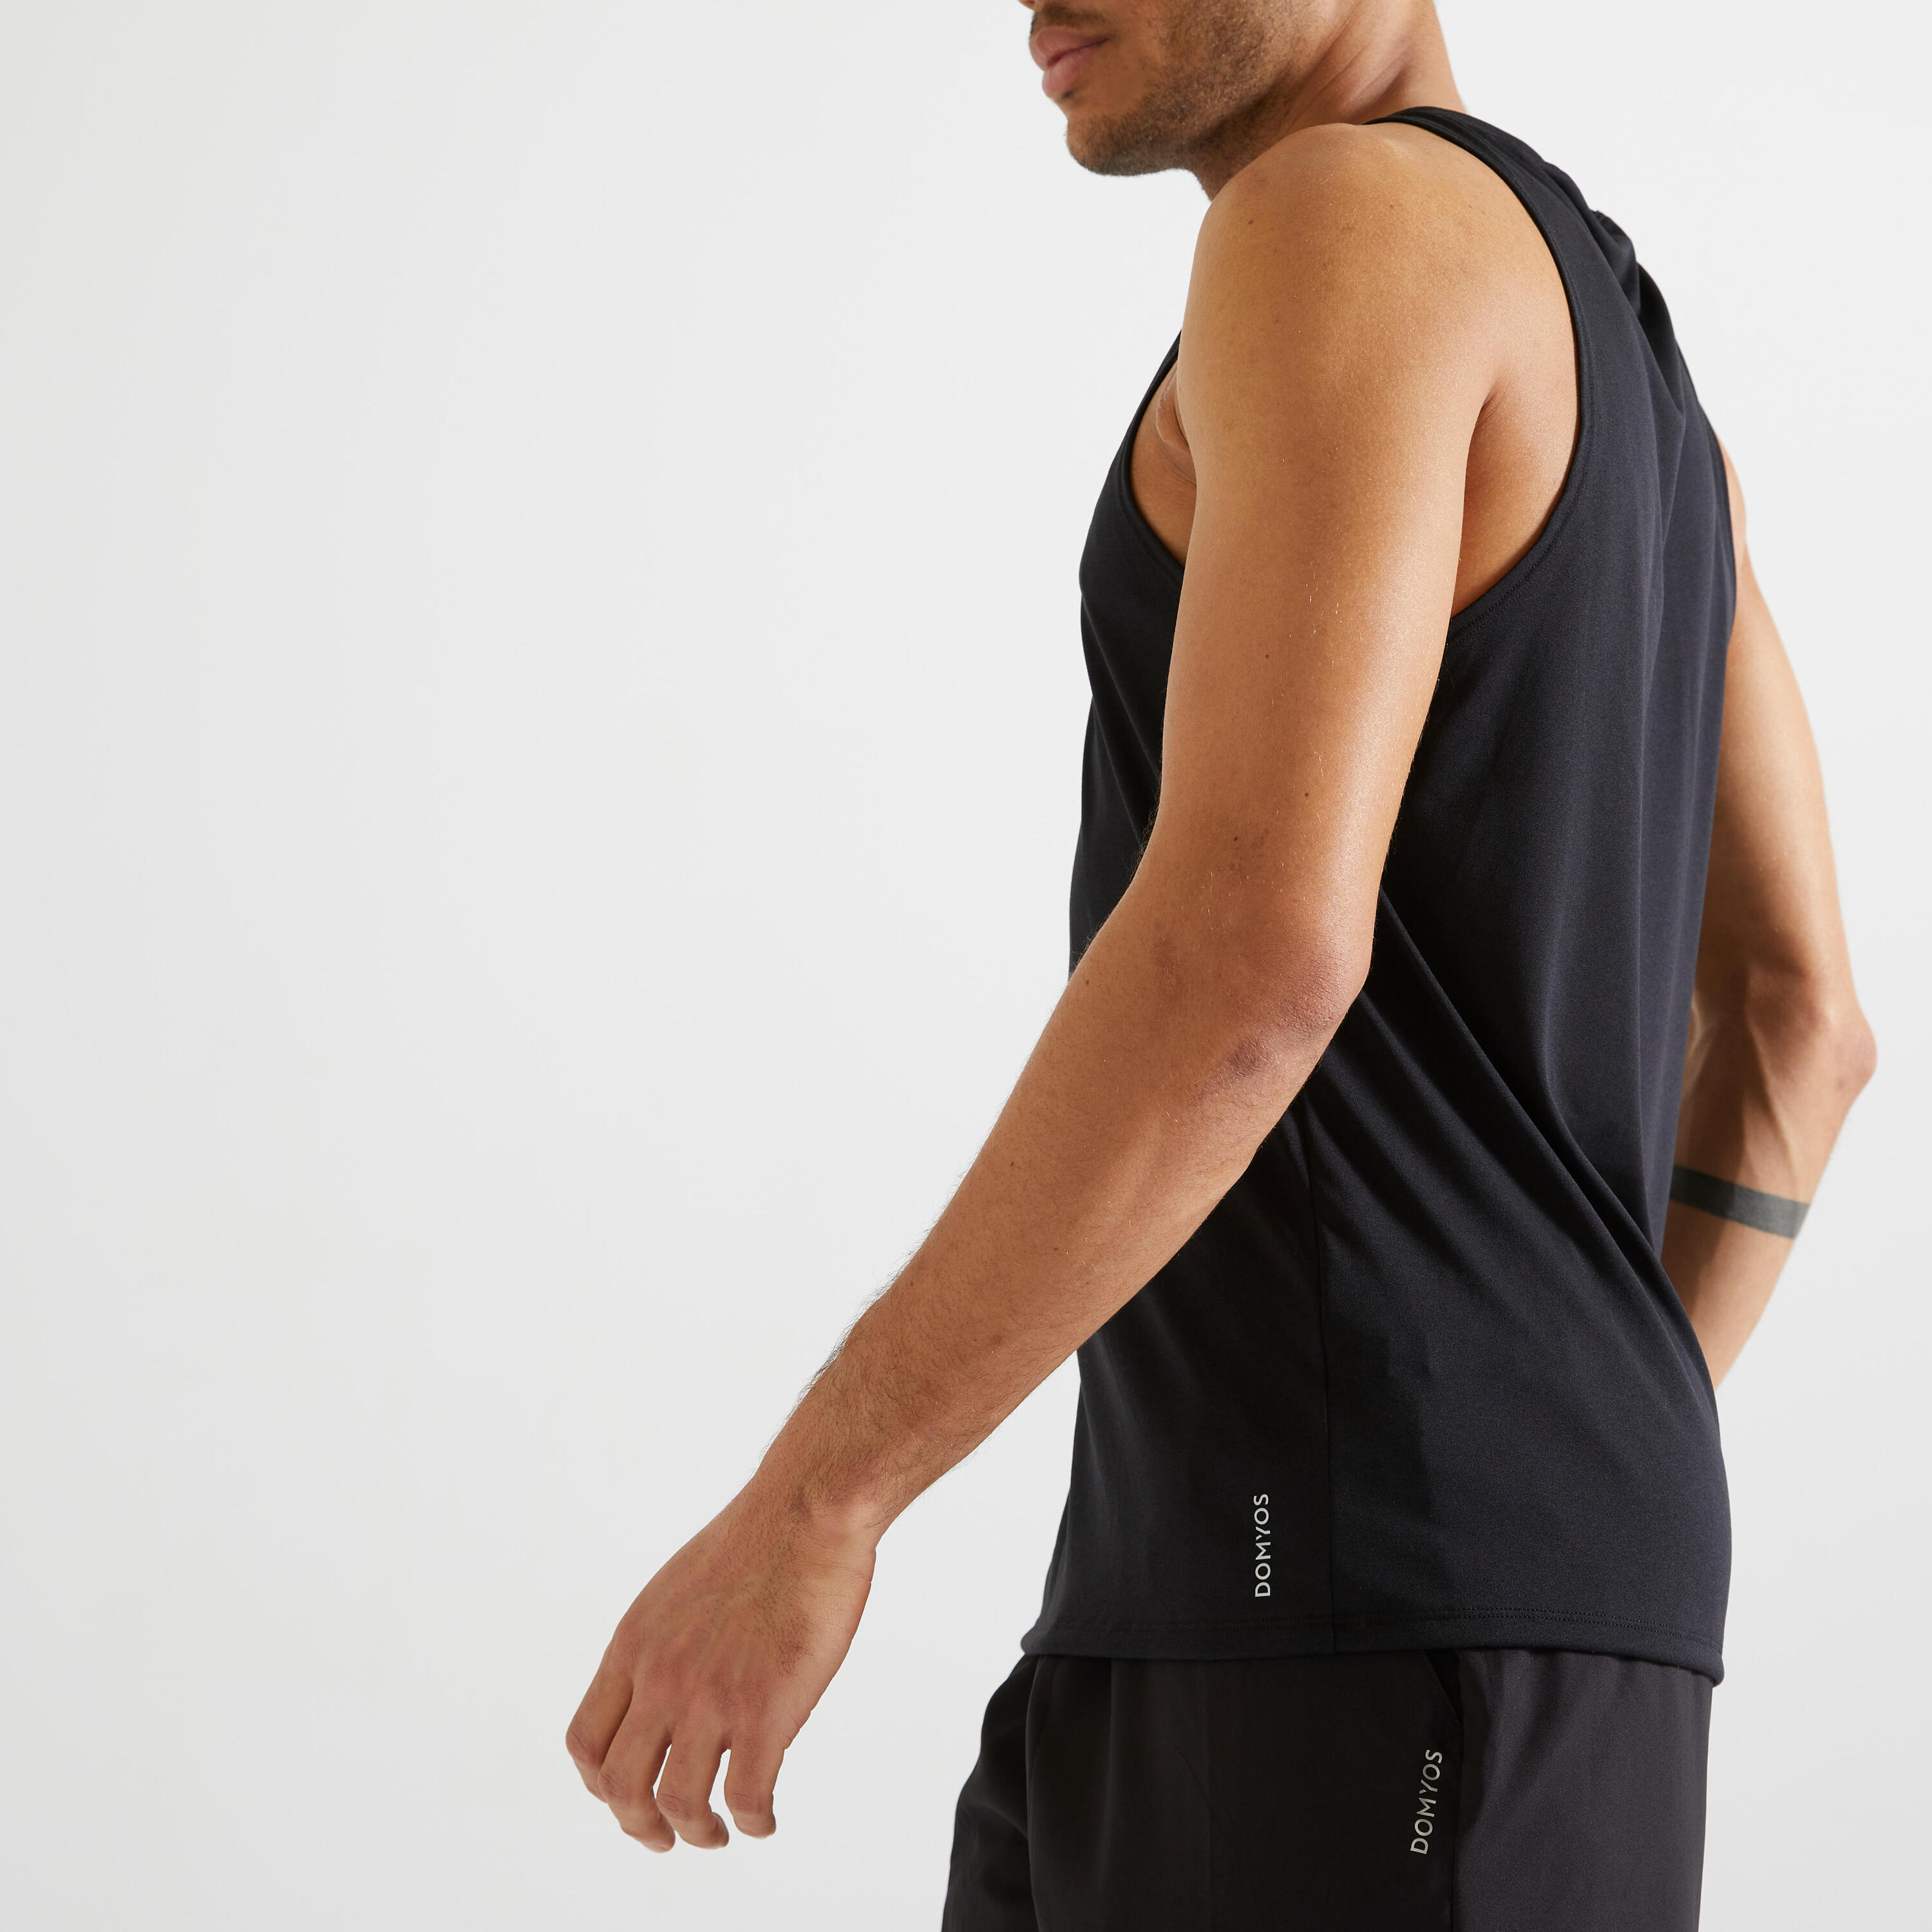 Men's Breathable Crew Neck Essential Collection Tank Top - Black 4/5